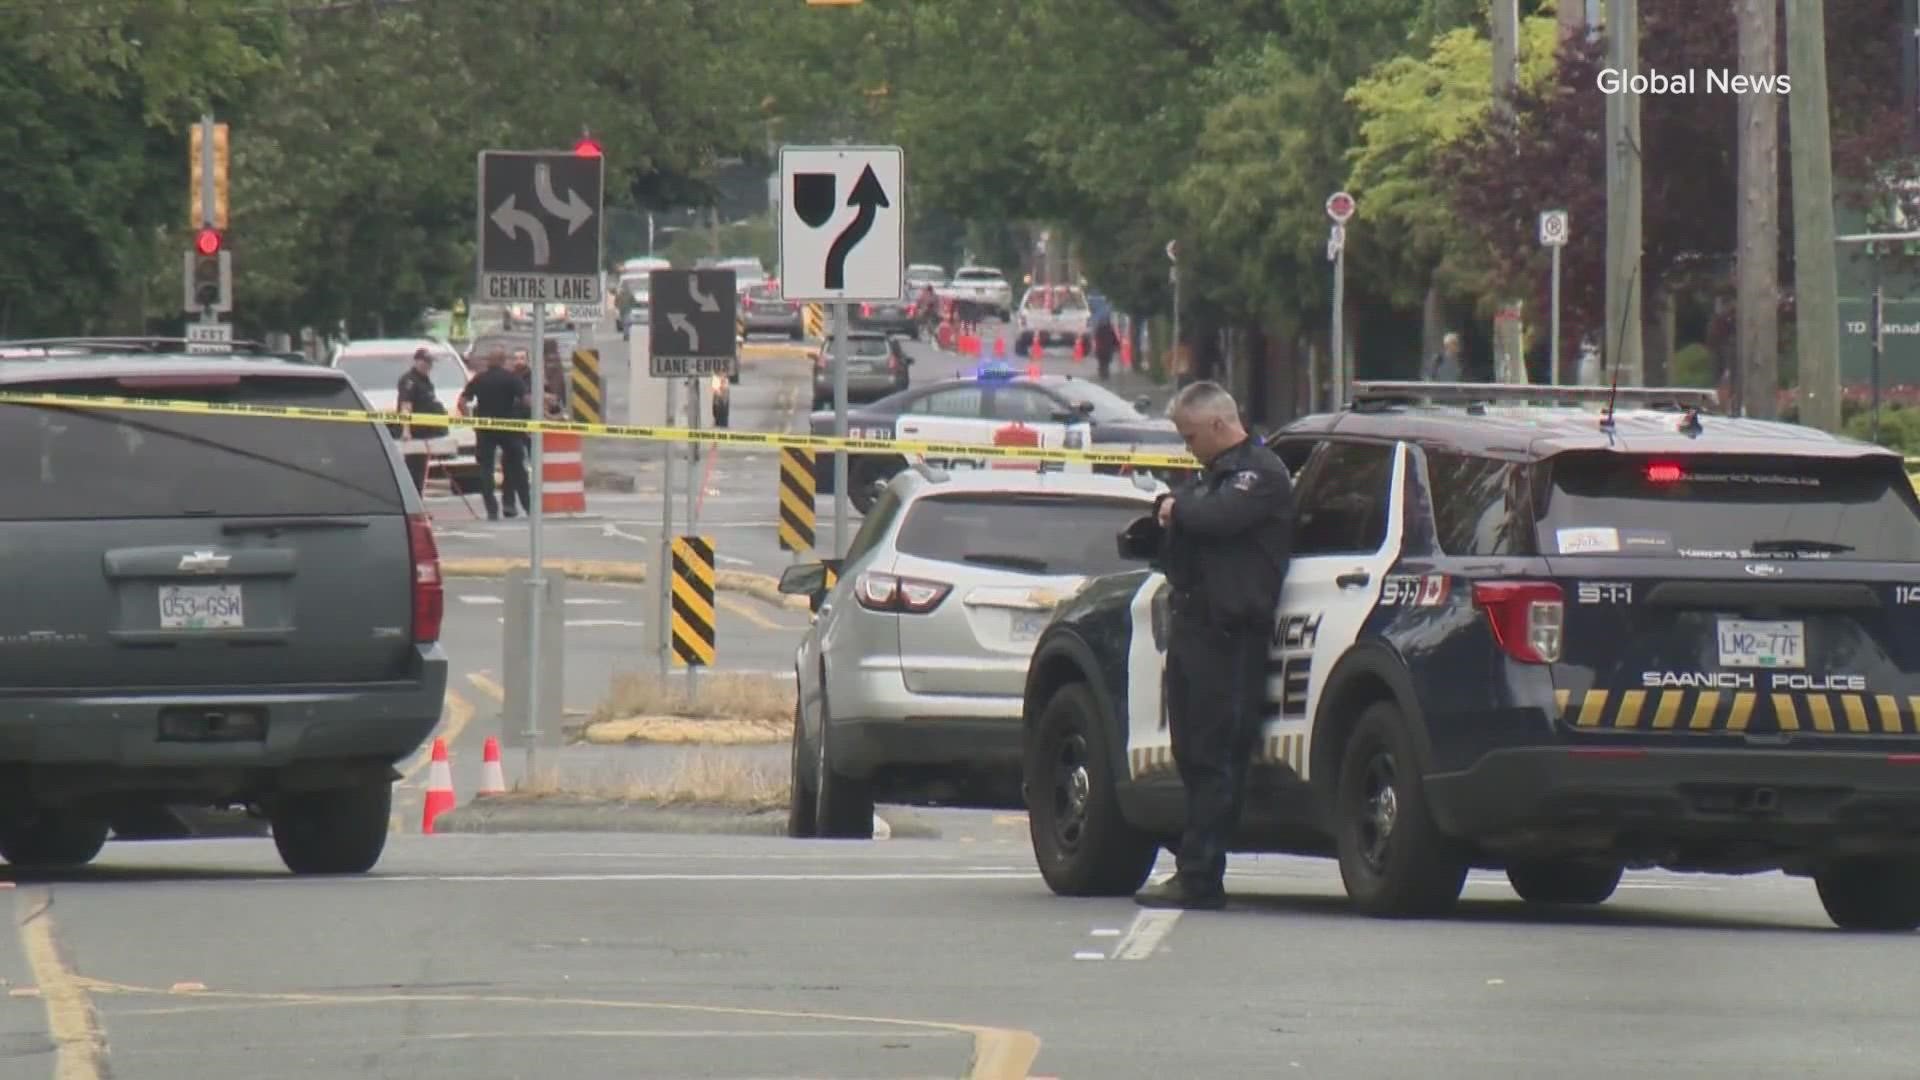 6 officers shot, 2 suspects killed in shooting at Saanich, B.C. bank